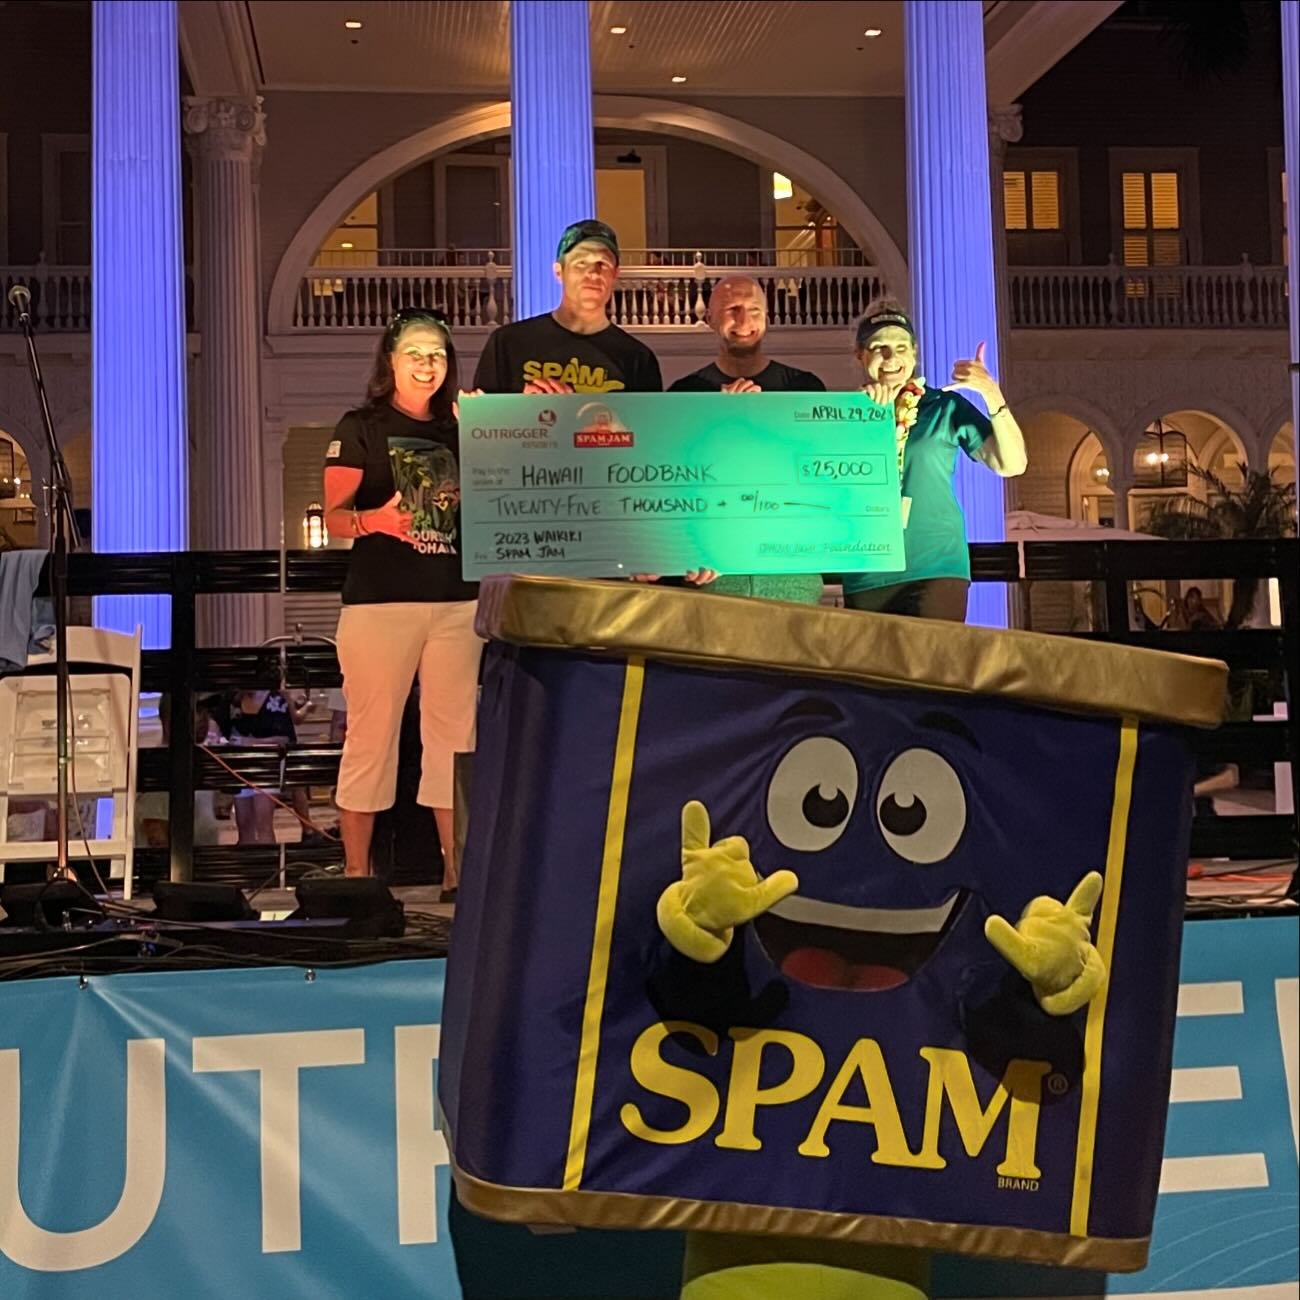 Did you know the Waikiki SPAM JAM is run by a 501(c)3 Non Profit Organization? The mission of our event is to support three local Hawaii non profits. 
. 
The Hawaii Foodbank is the beneficiary of funds raised by the Waikiki SPAM JAM. 

The Waikiki SP